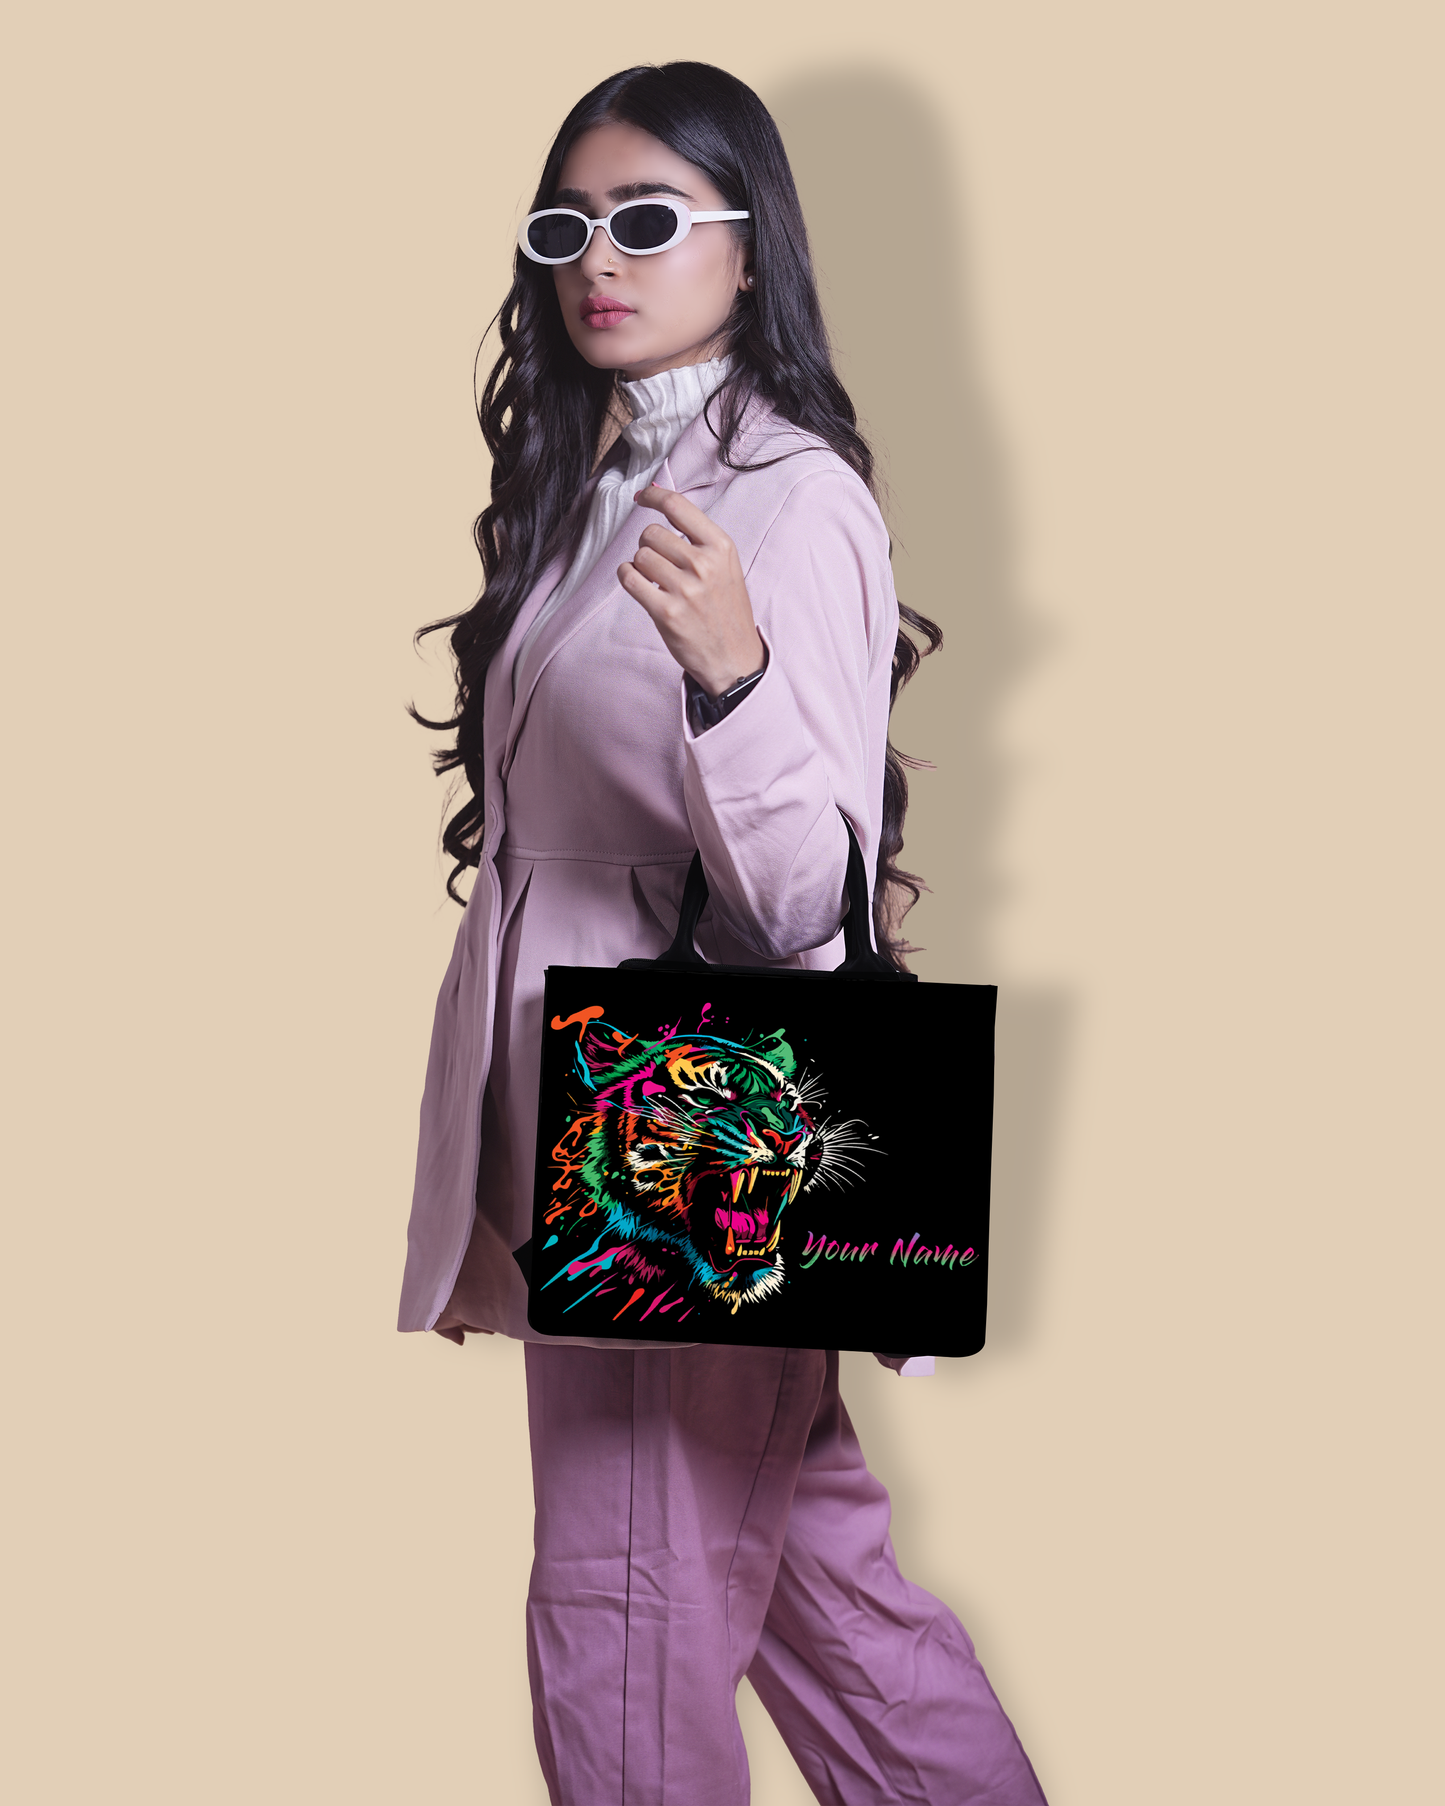 Personalized Small Tote Bag Designed With Colourfull Roaring Bangal Tiger